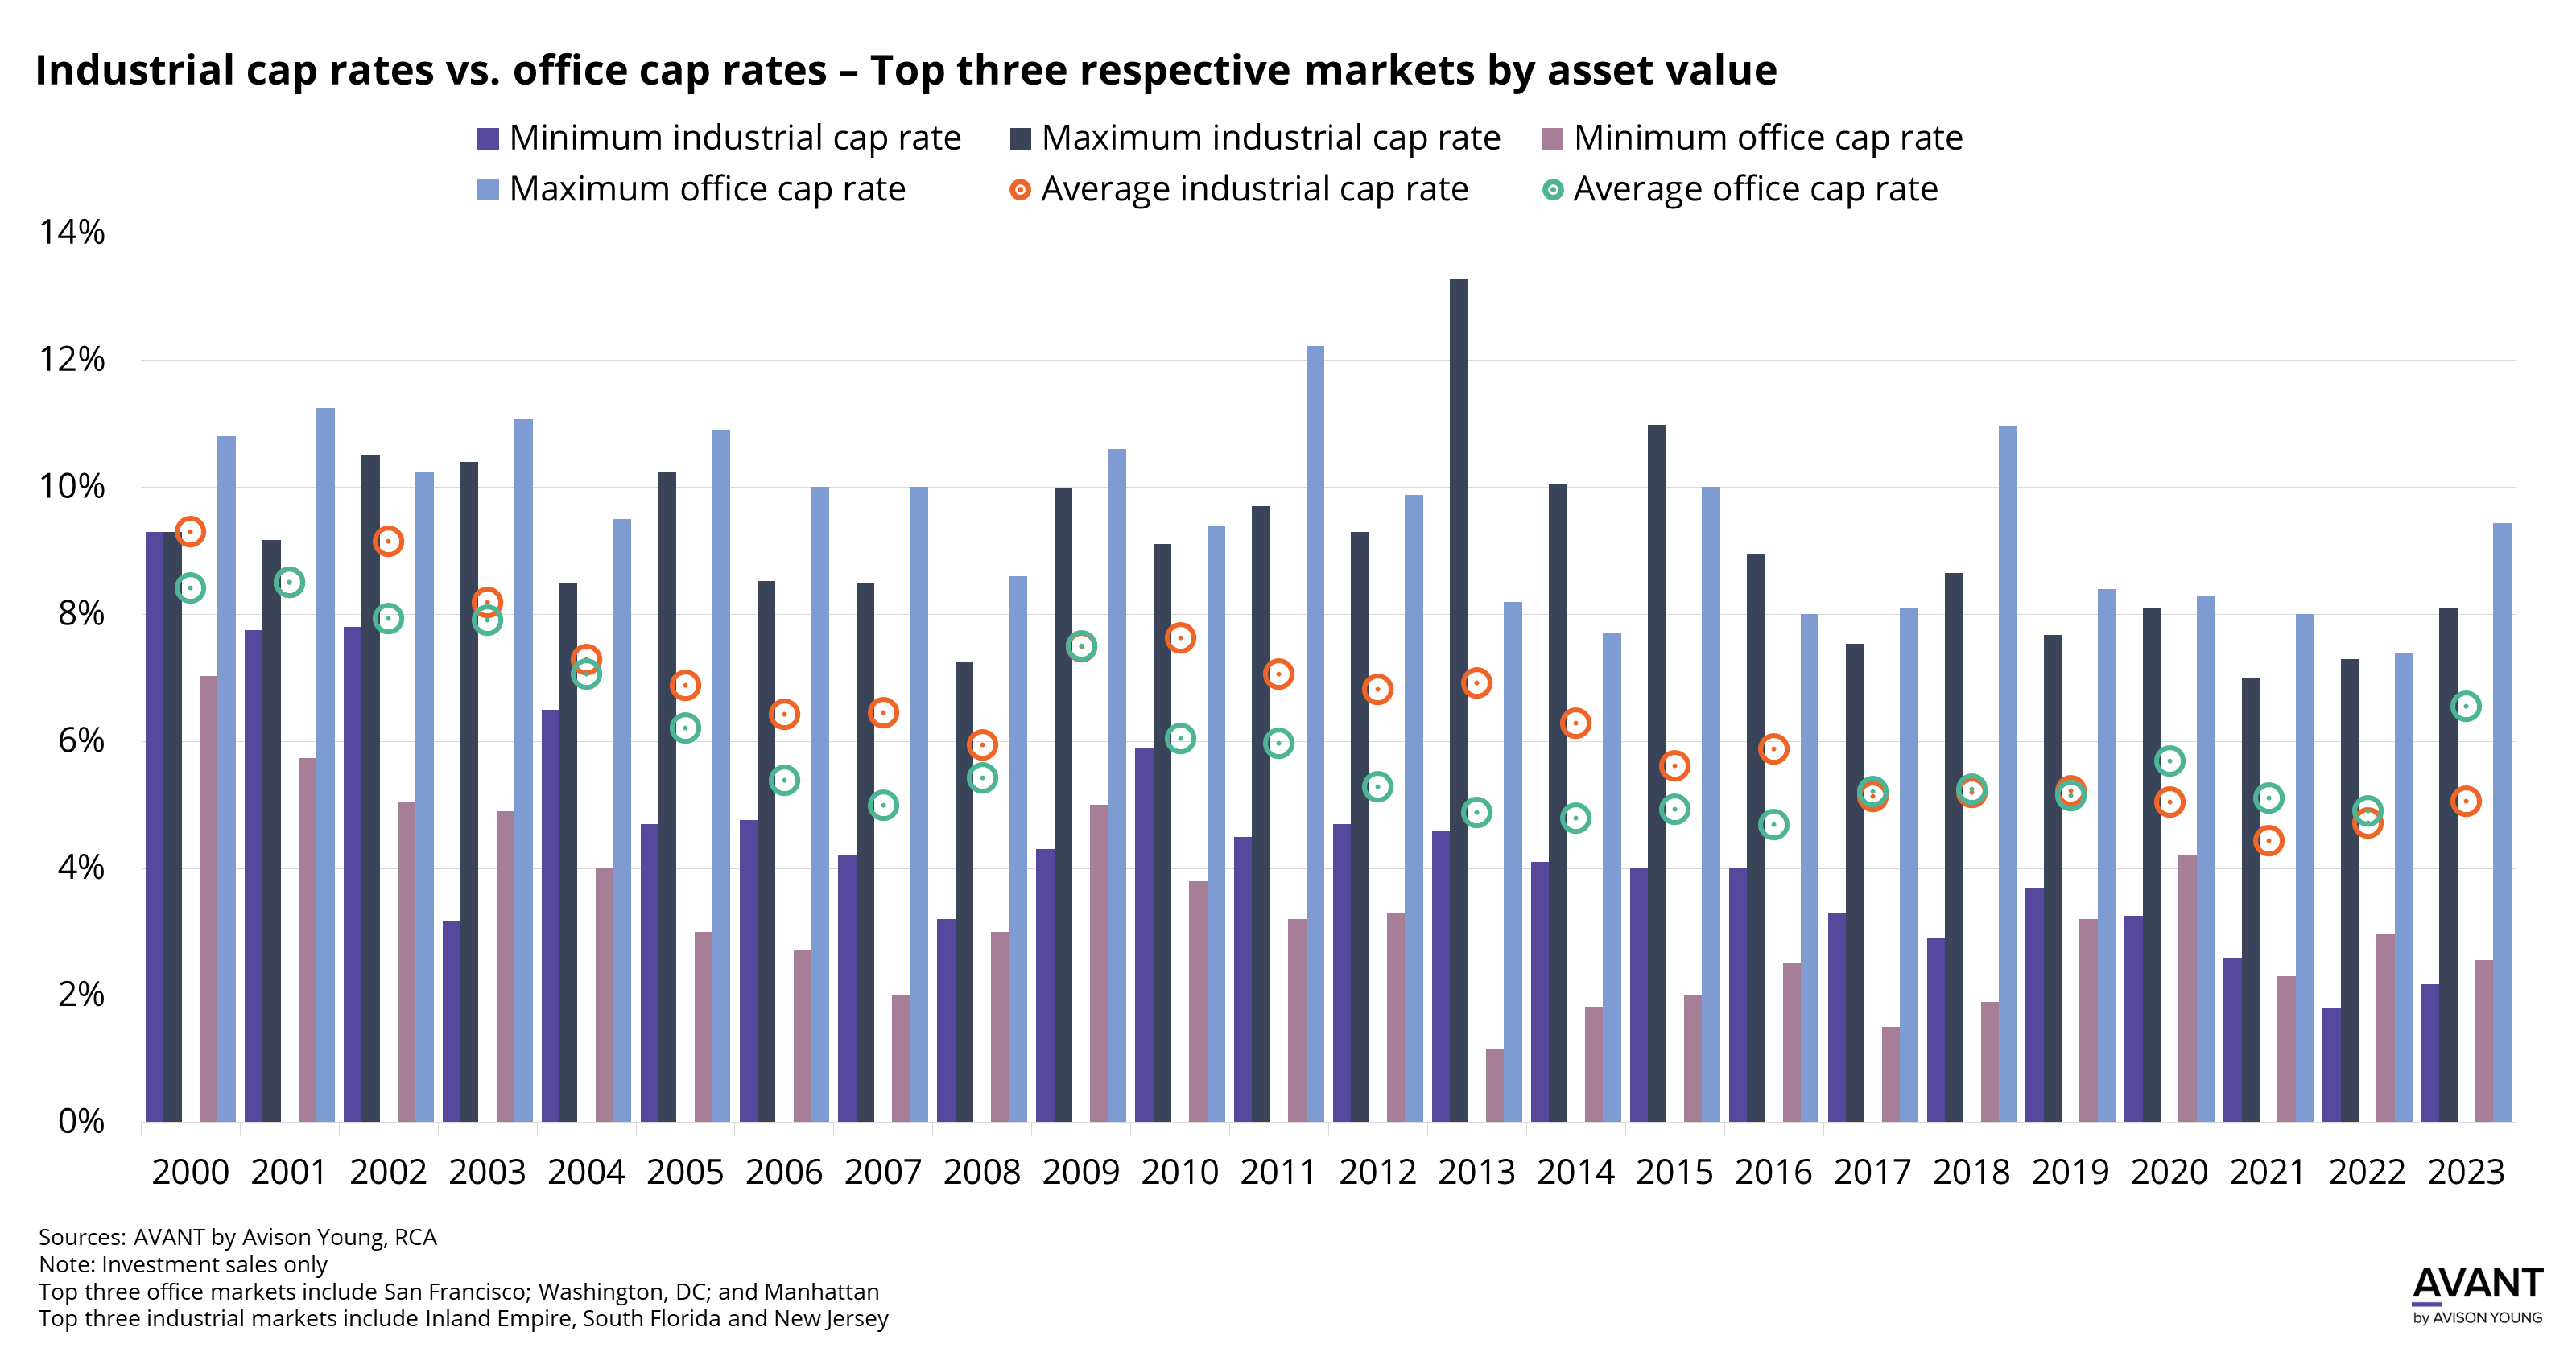 graph of industrial capitalization rates vs office cap rates in the top three respective markets by asset value from 2000 to 2023